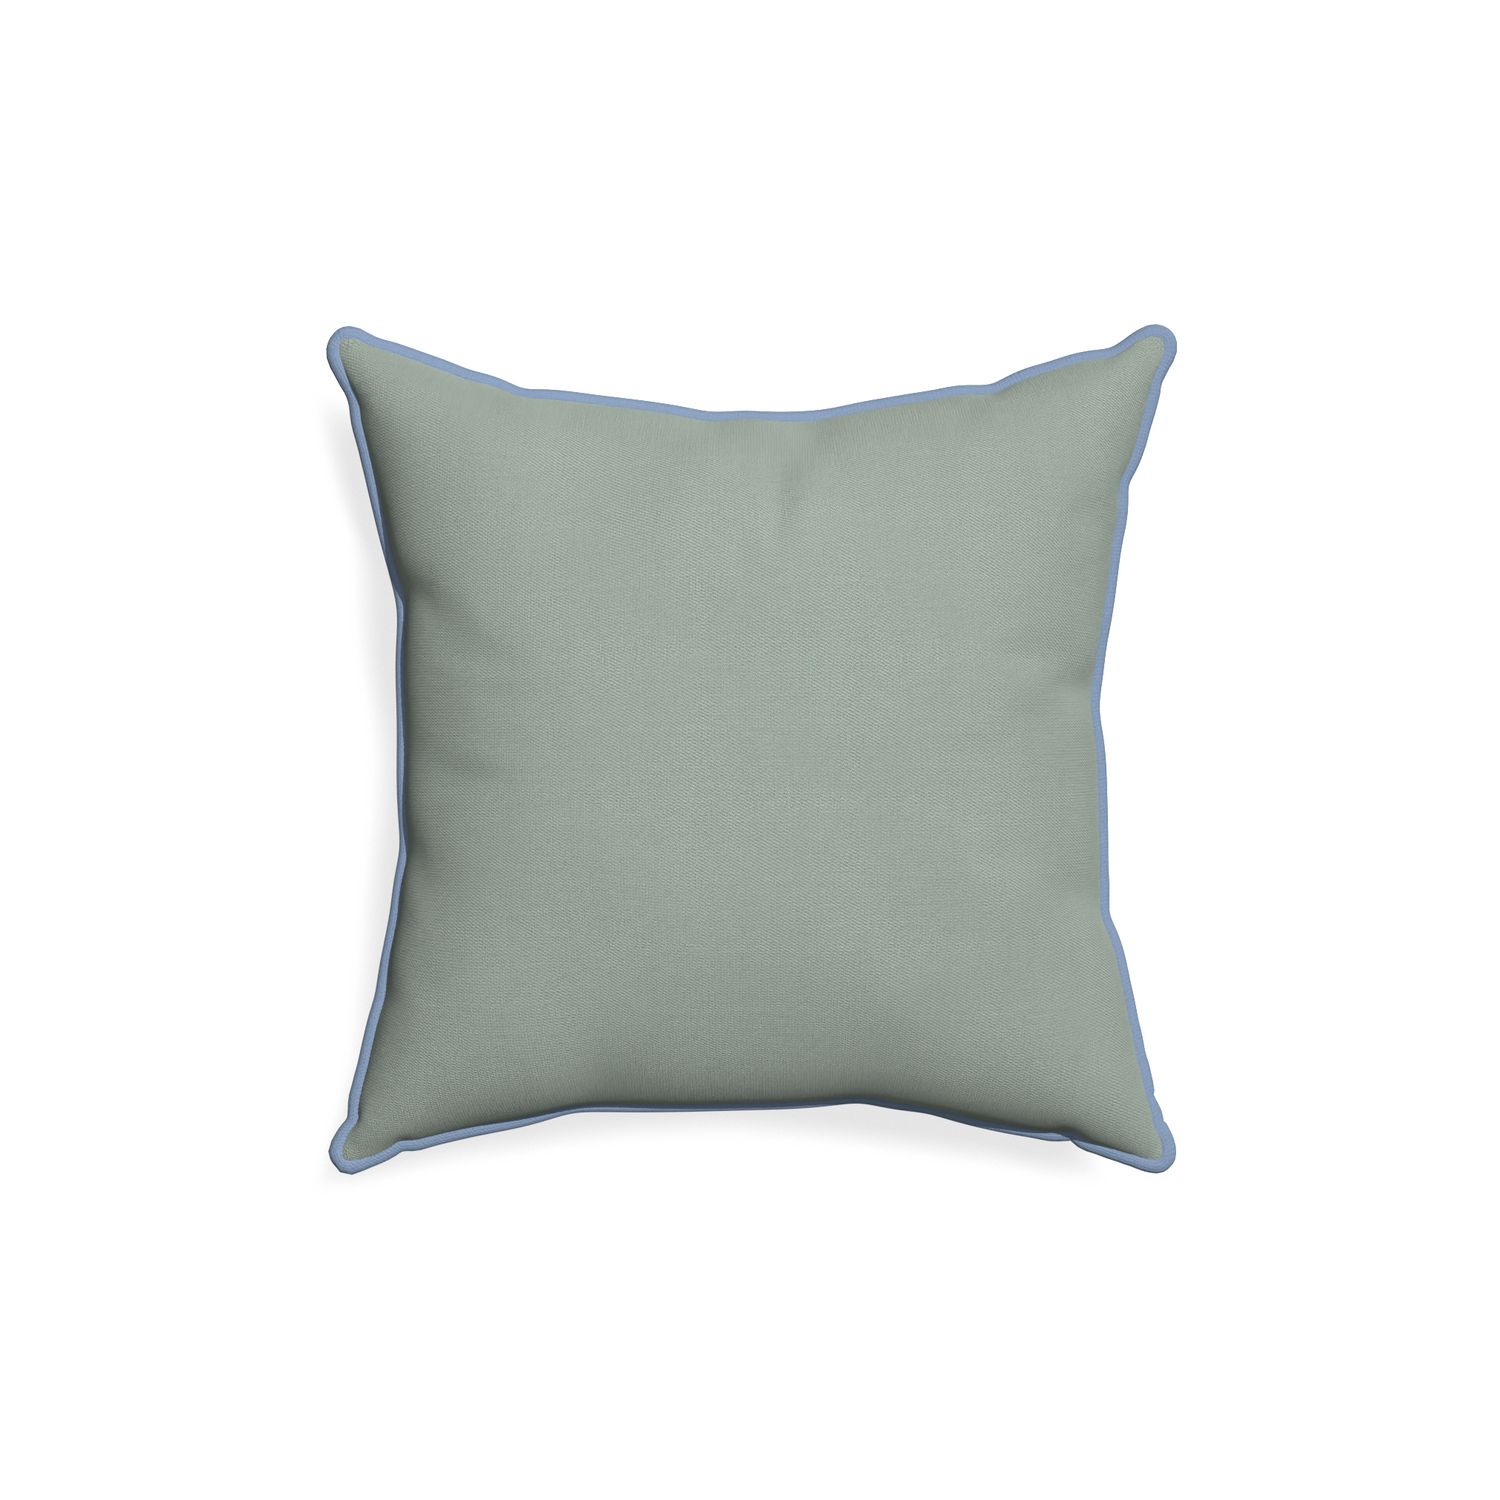 18-square sage custom sage green cottonpillow with sky piping on white background